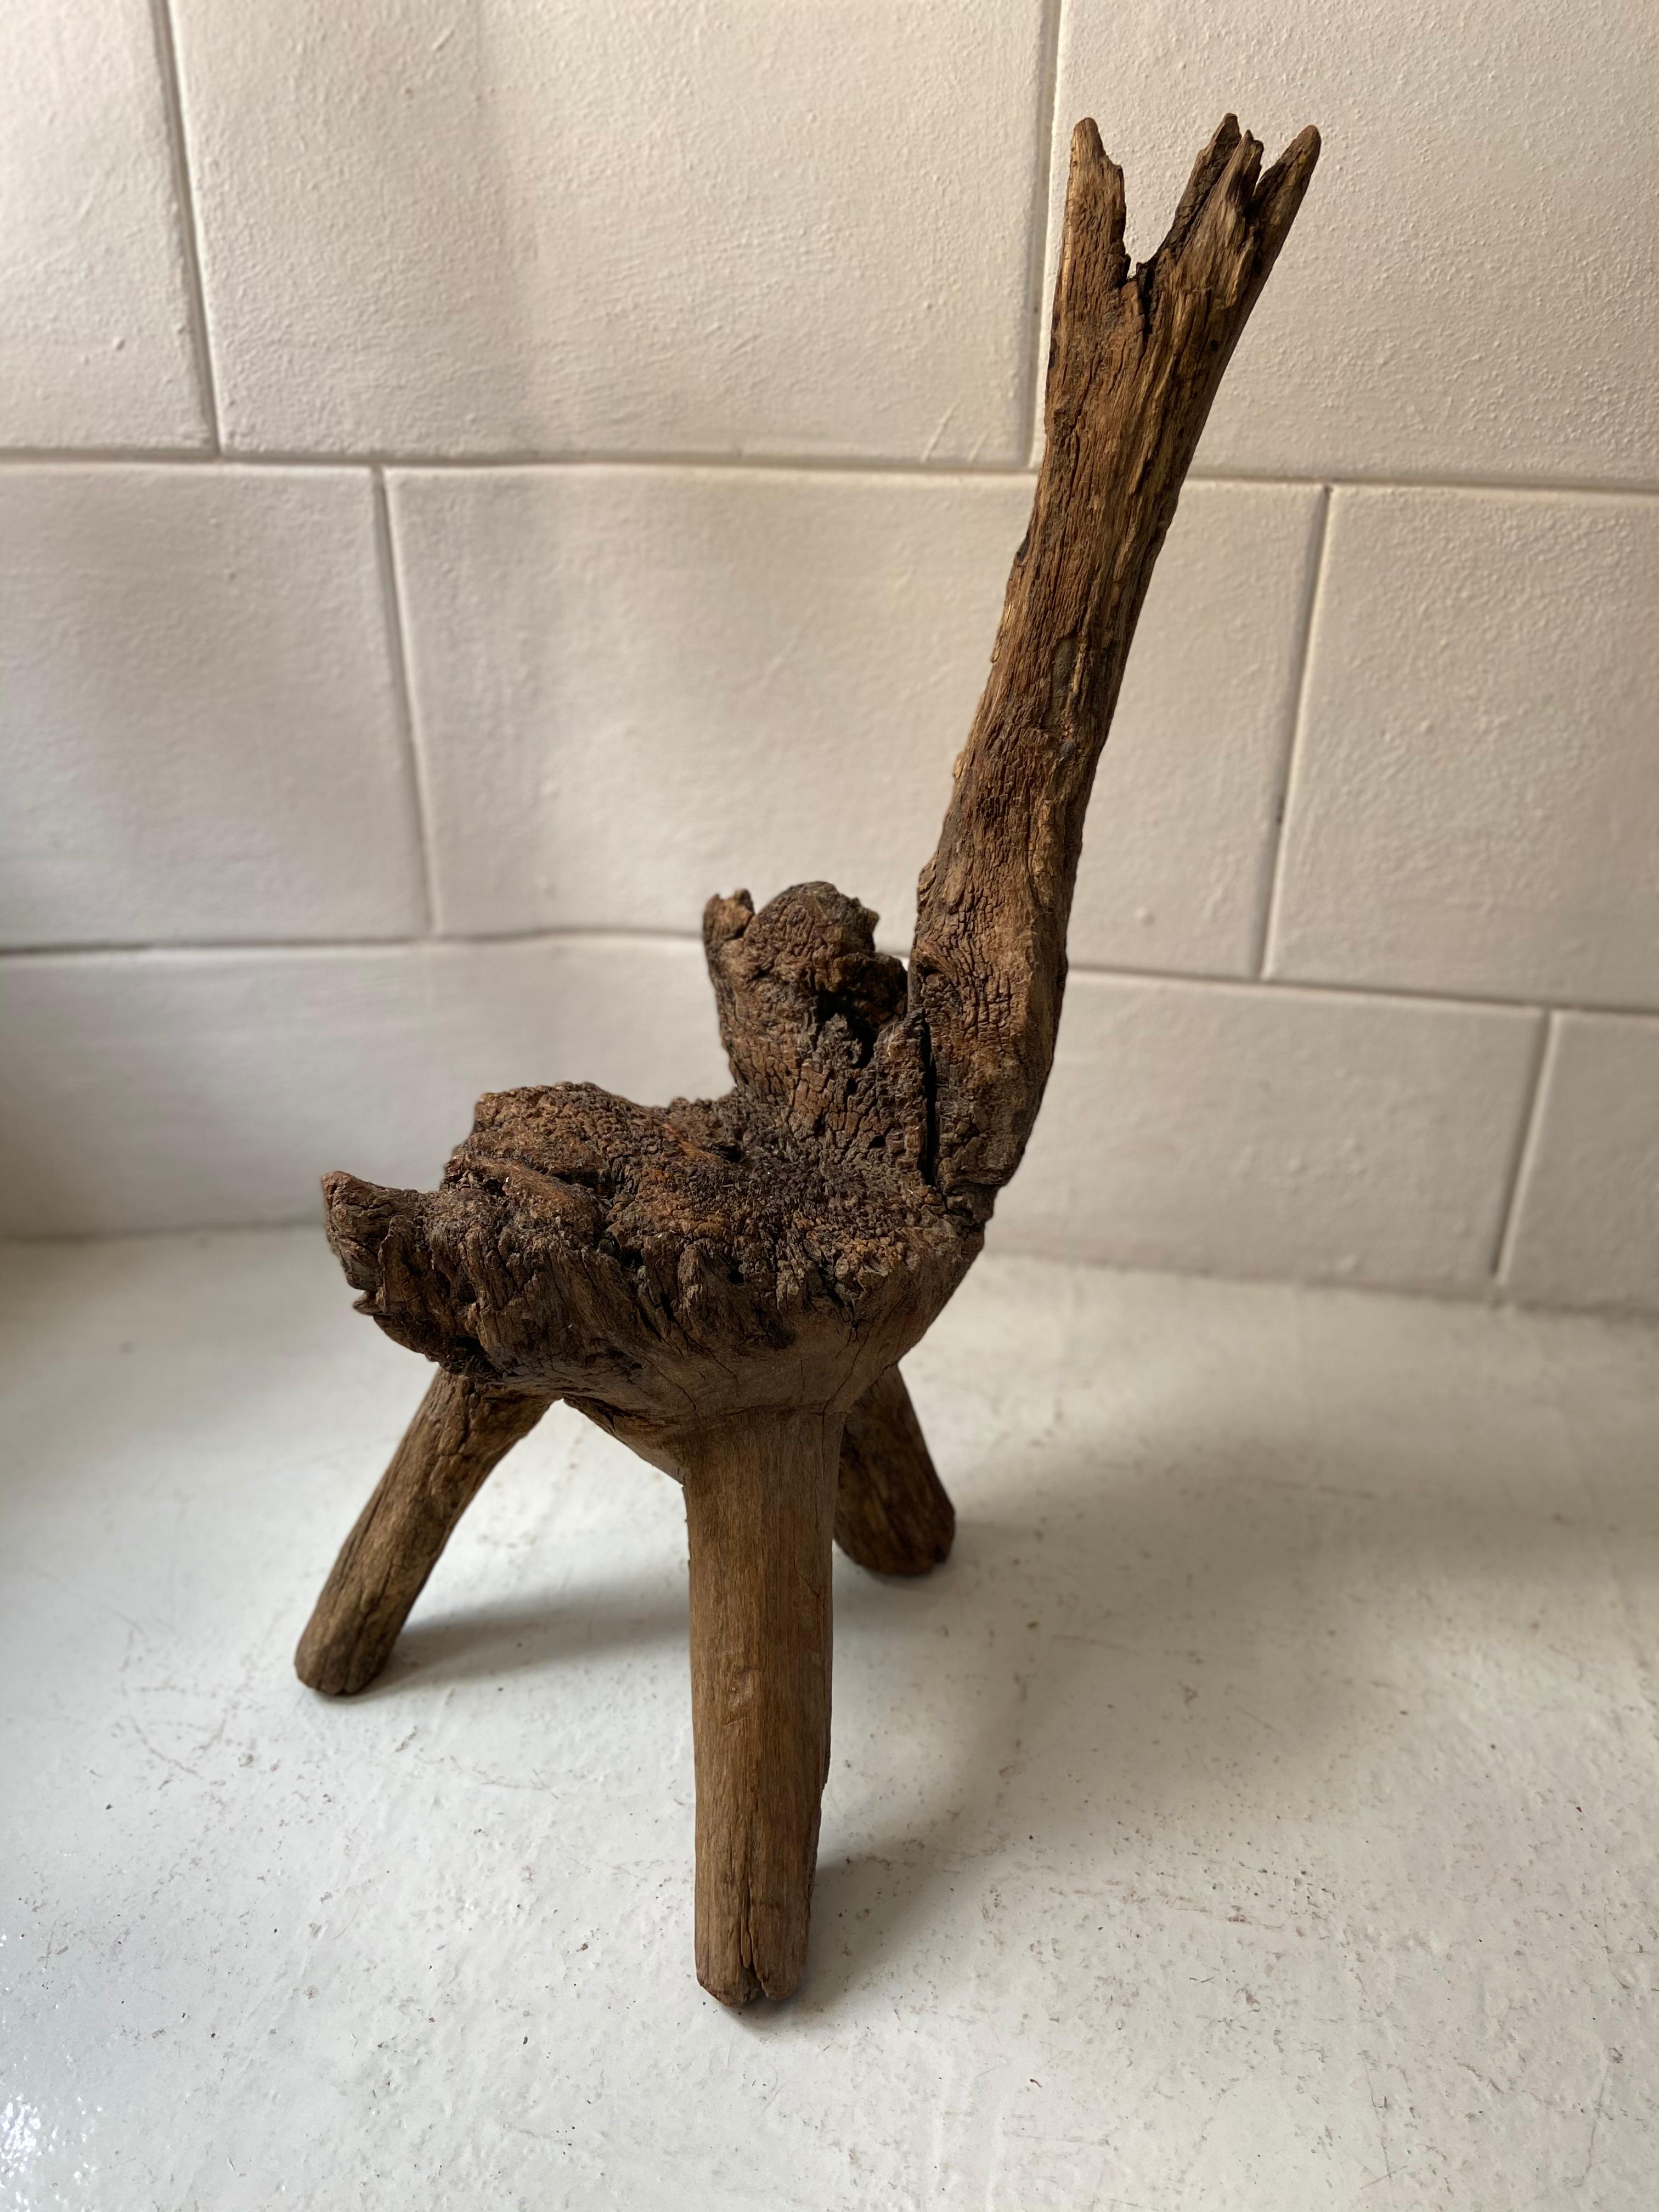 Rustic mesquite stool from San Felipe, Guanajuato, circa early 1900s. The seat is heavily weathered throughout. Mesquite will typically give off this look only after a very long period of time of enduring the elements. Mesquite is one of the hardest